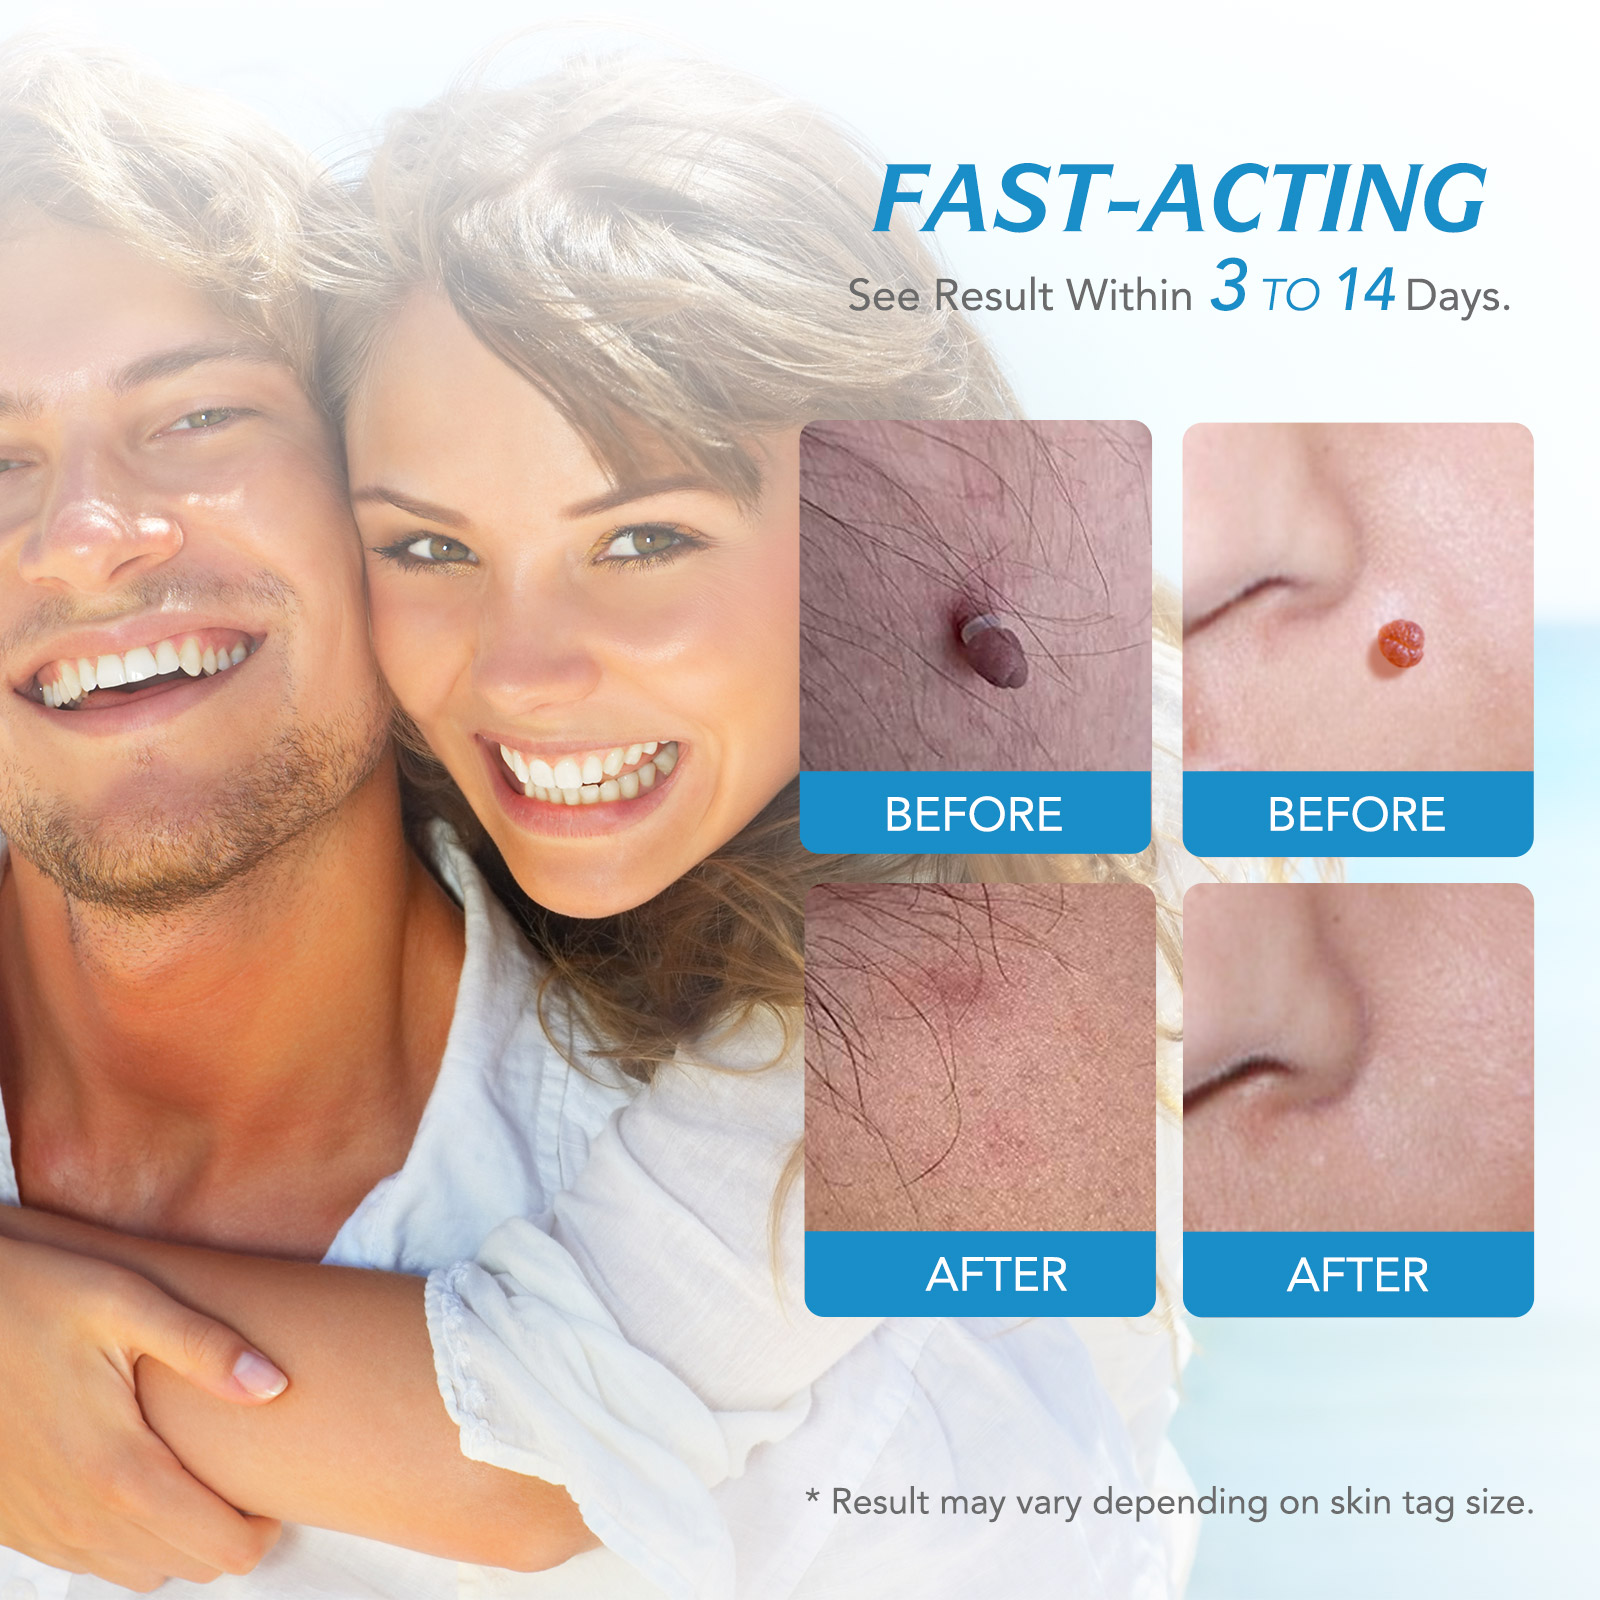 ideal for people who develop skin tags on a regular basis and need effective treatment.